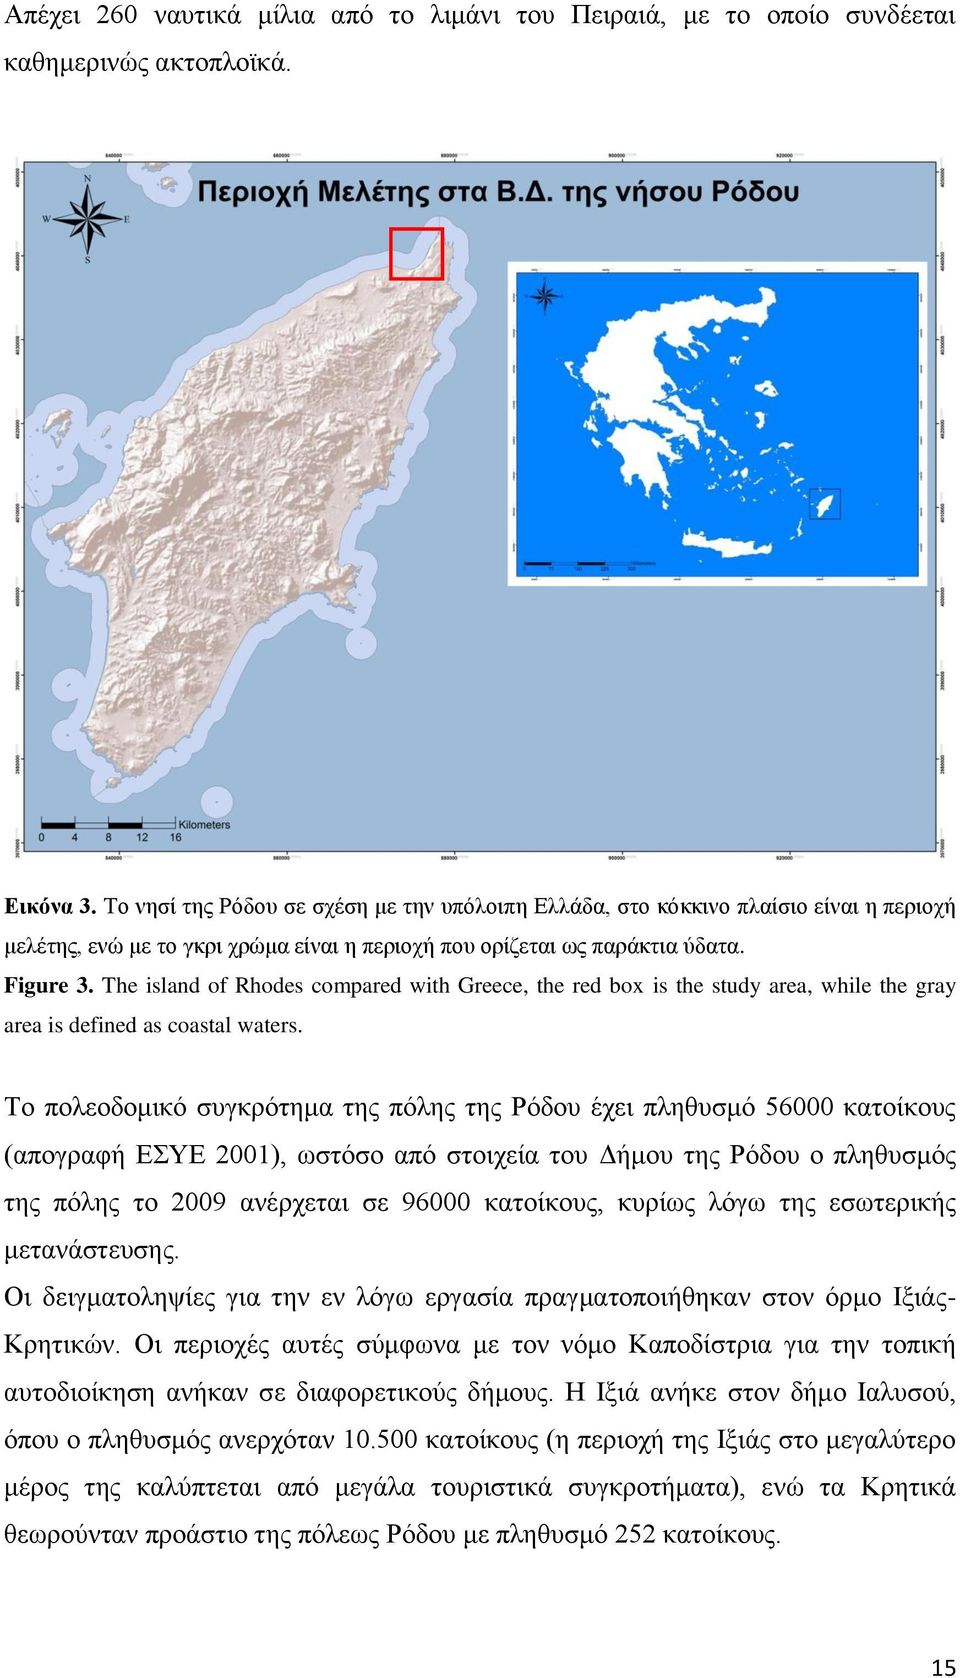 The island of Rhodes compared with Greece, the red box is the study area, while the gray area is defined as coastal waters.